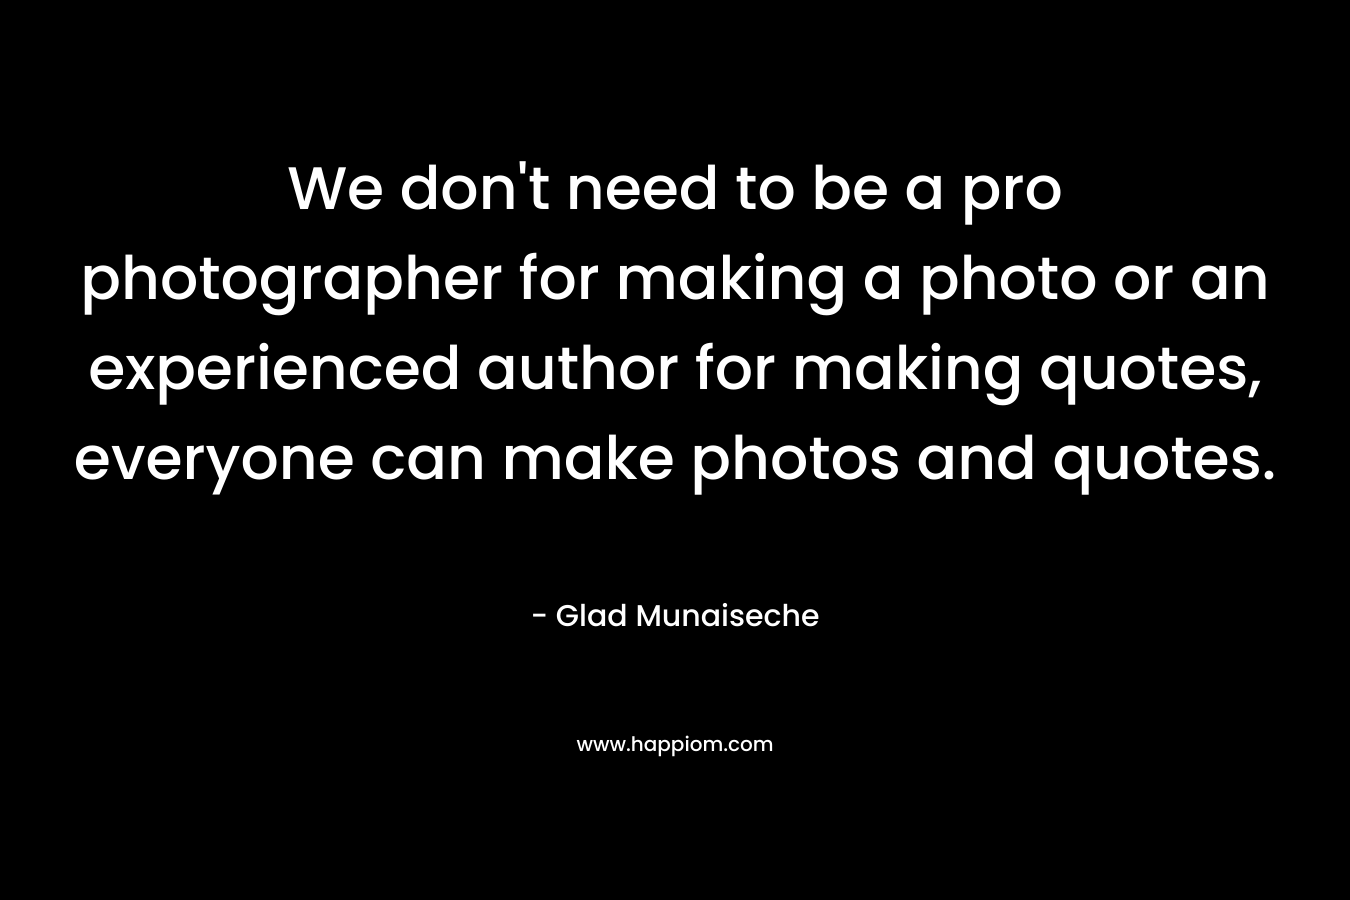 We don't need to be a pro photographer for making a photo or an experienced author for making quotes, everyone can make photos and quotes.